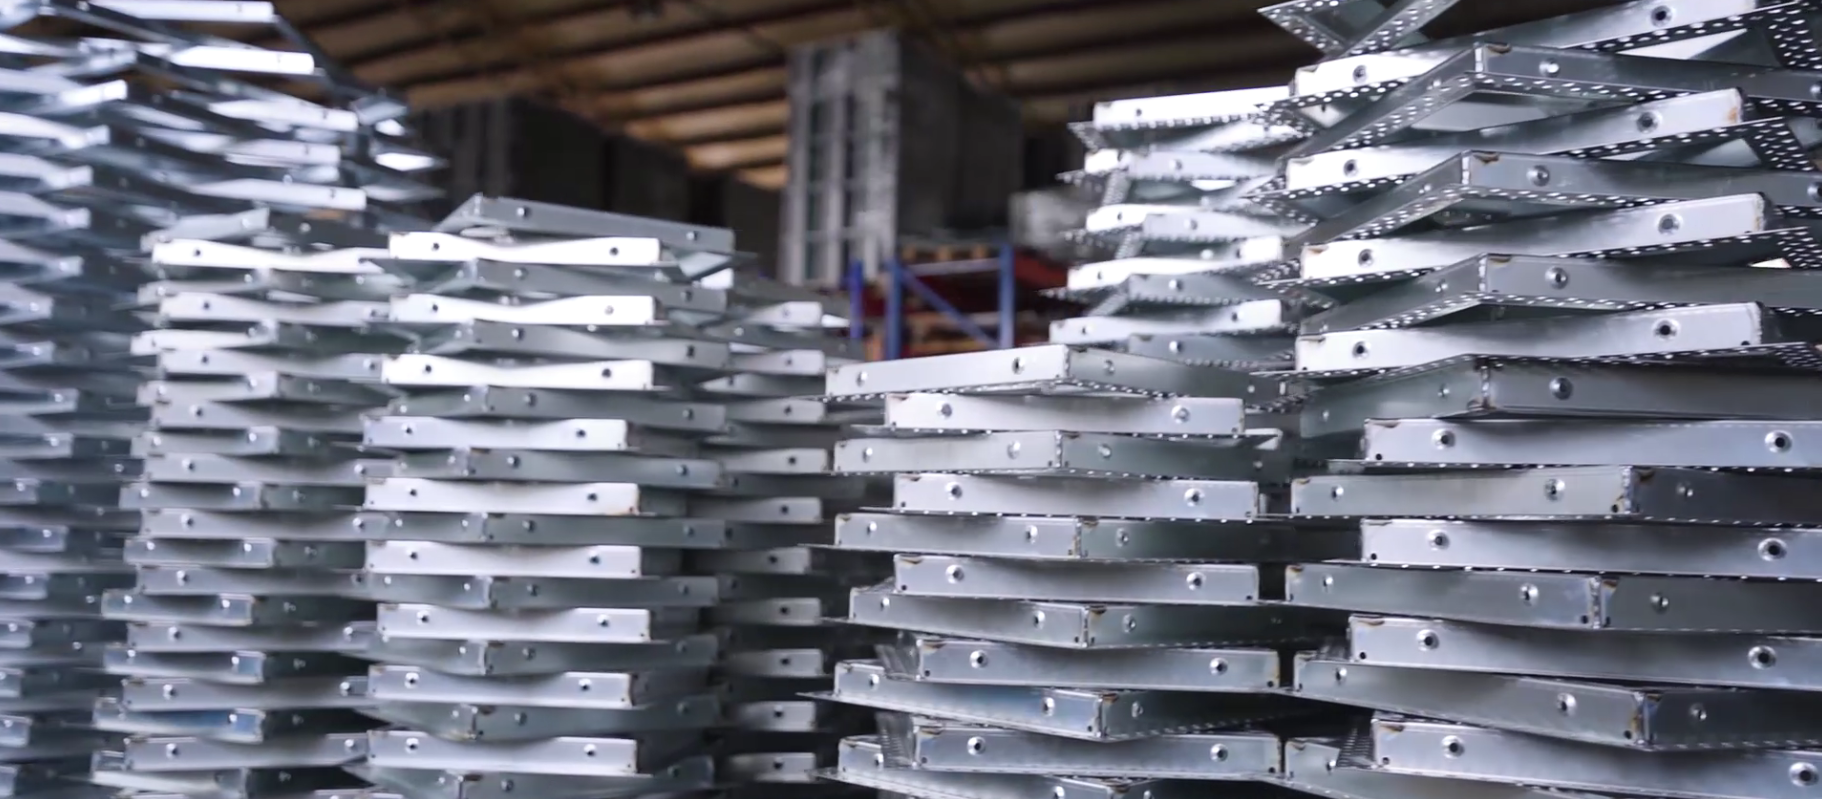 Difficulties in sheet metal processing.